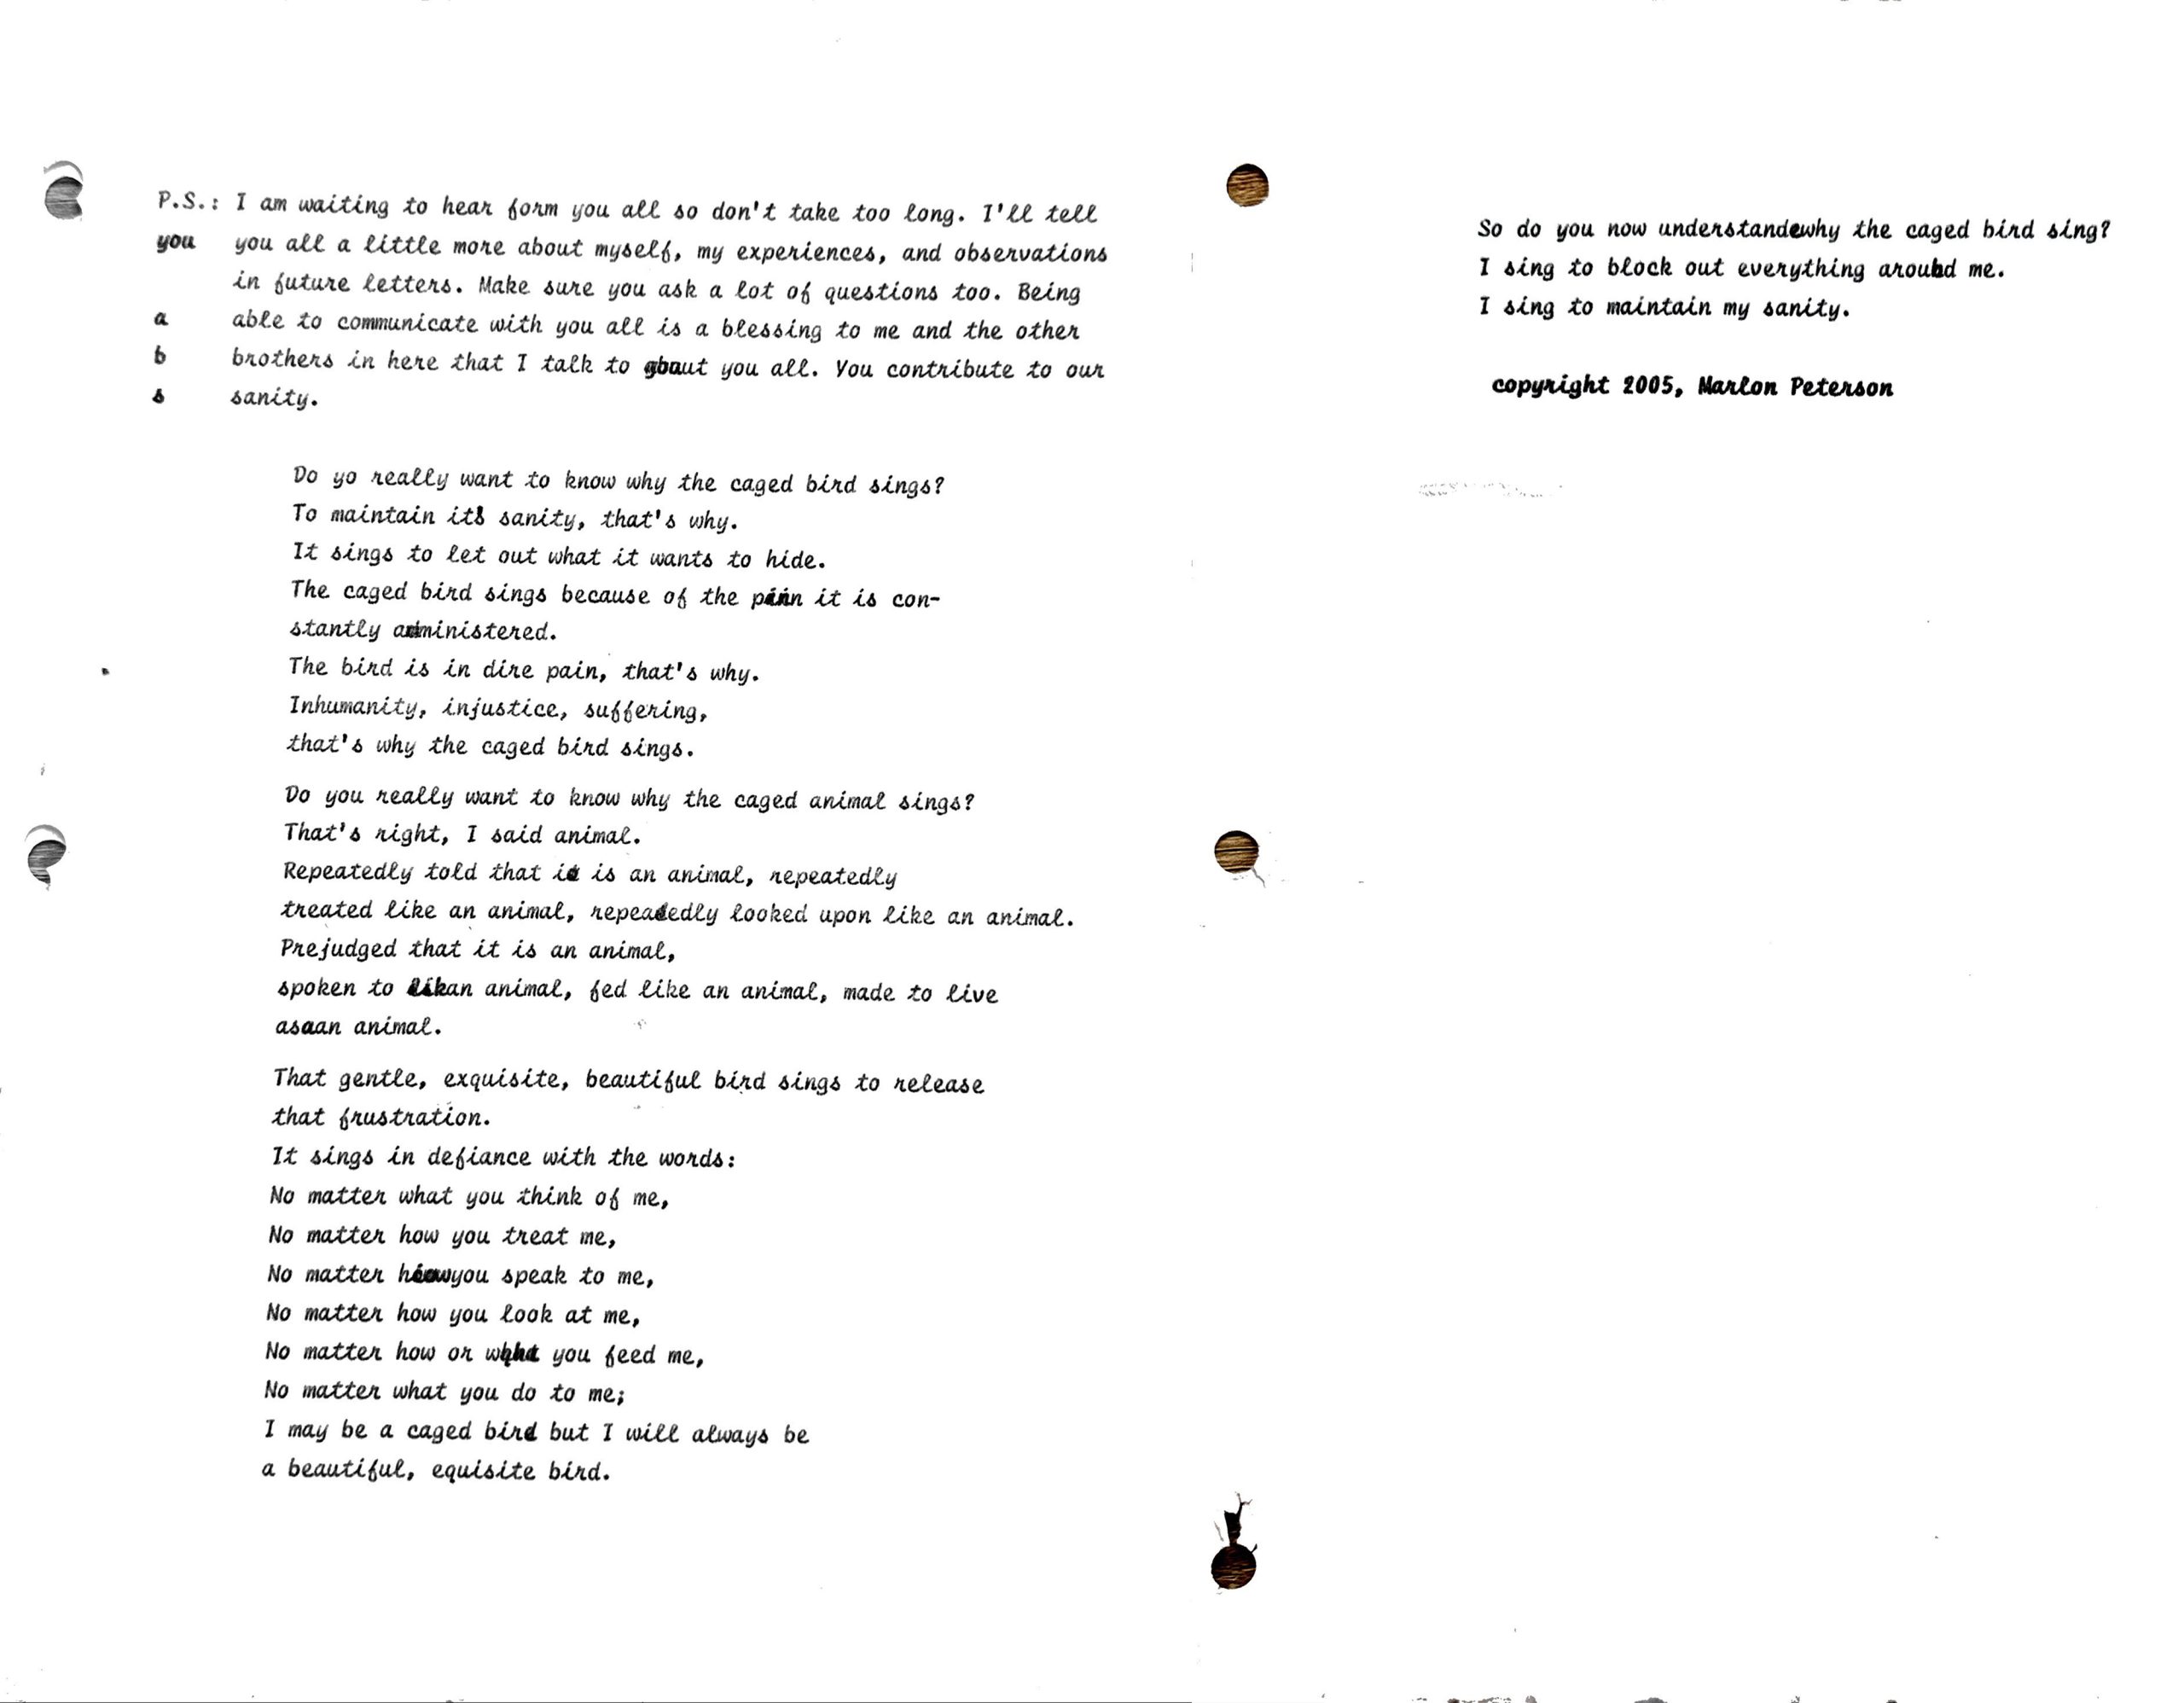 Typewritten poem by Marlon Peterson from his book Bird Uncaged: An Abolitionist's Freedom Song from 2005.